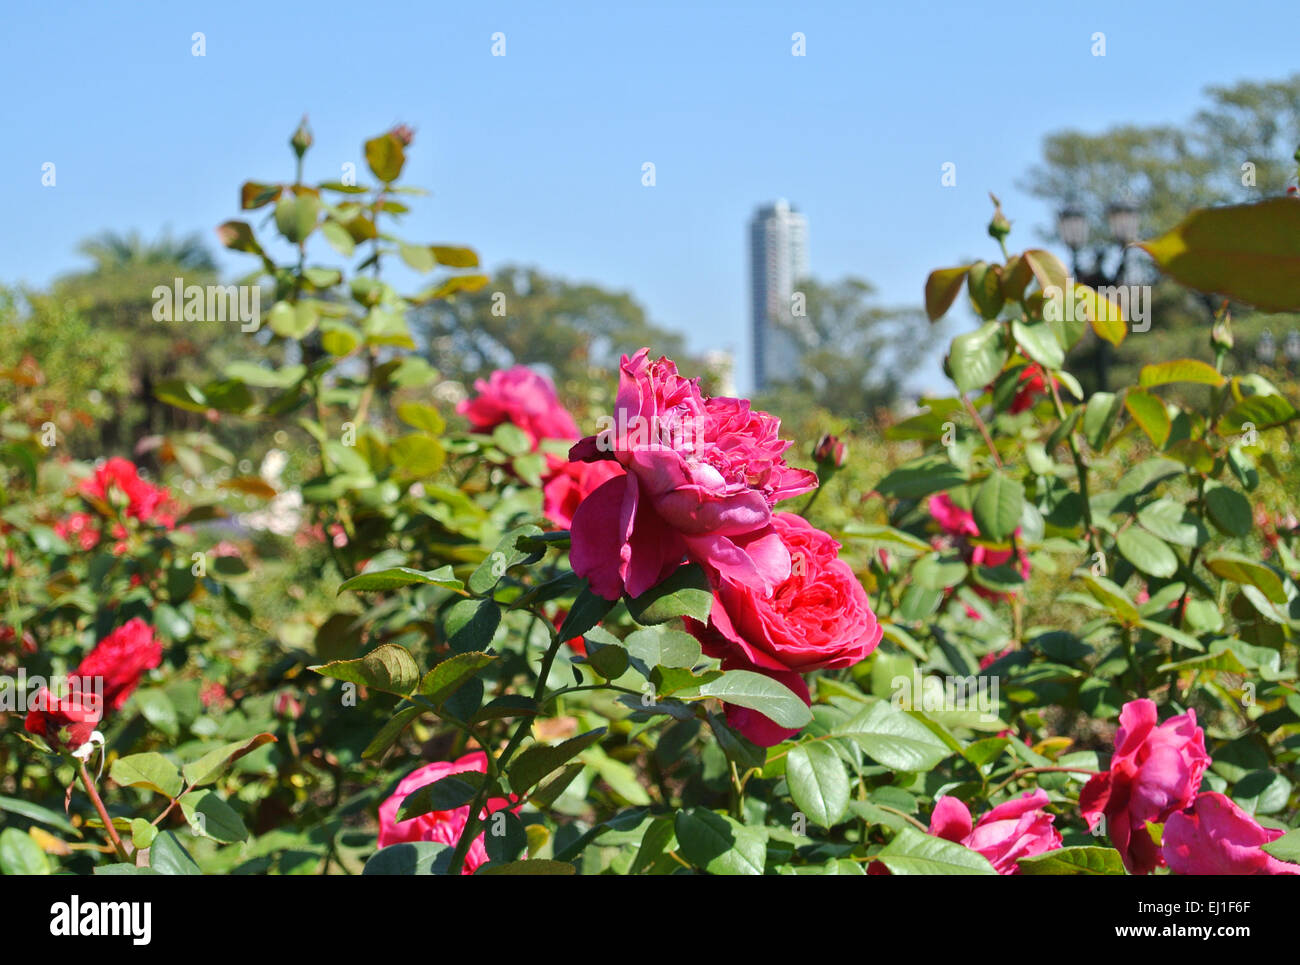 Le Rose in 'Rosendal parco". Buenos Aires, Argentina. Foto Stock